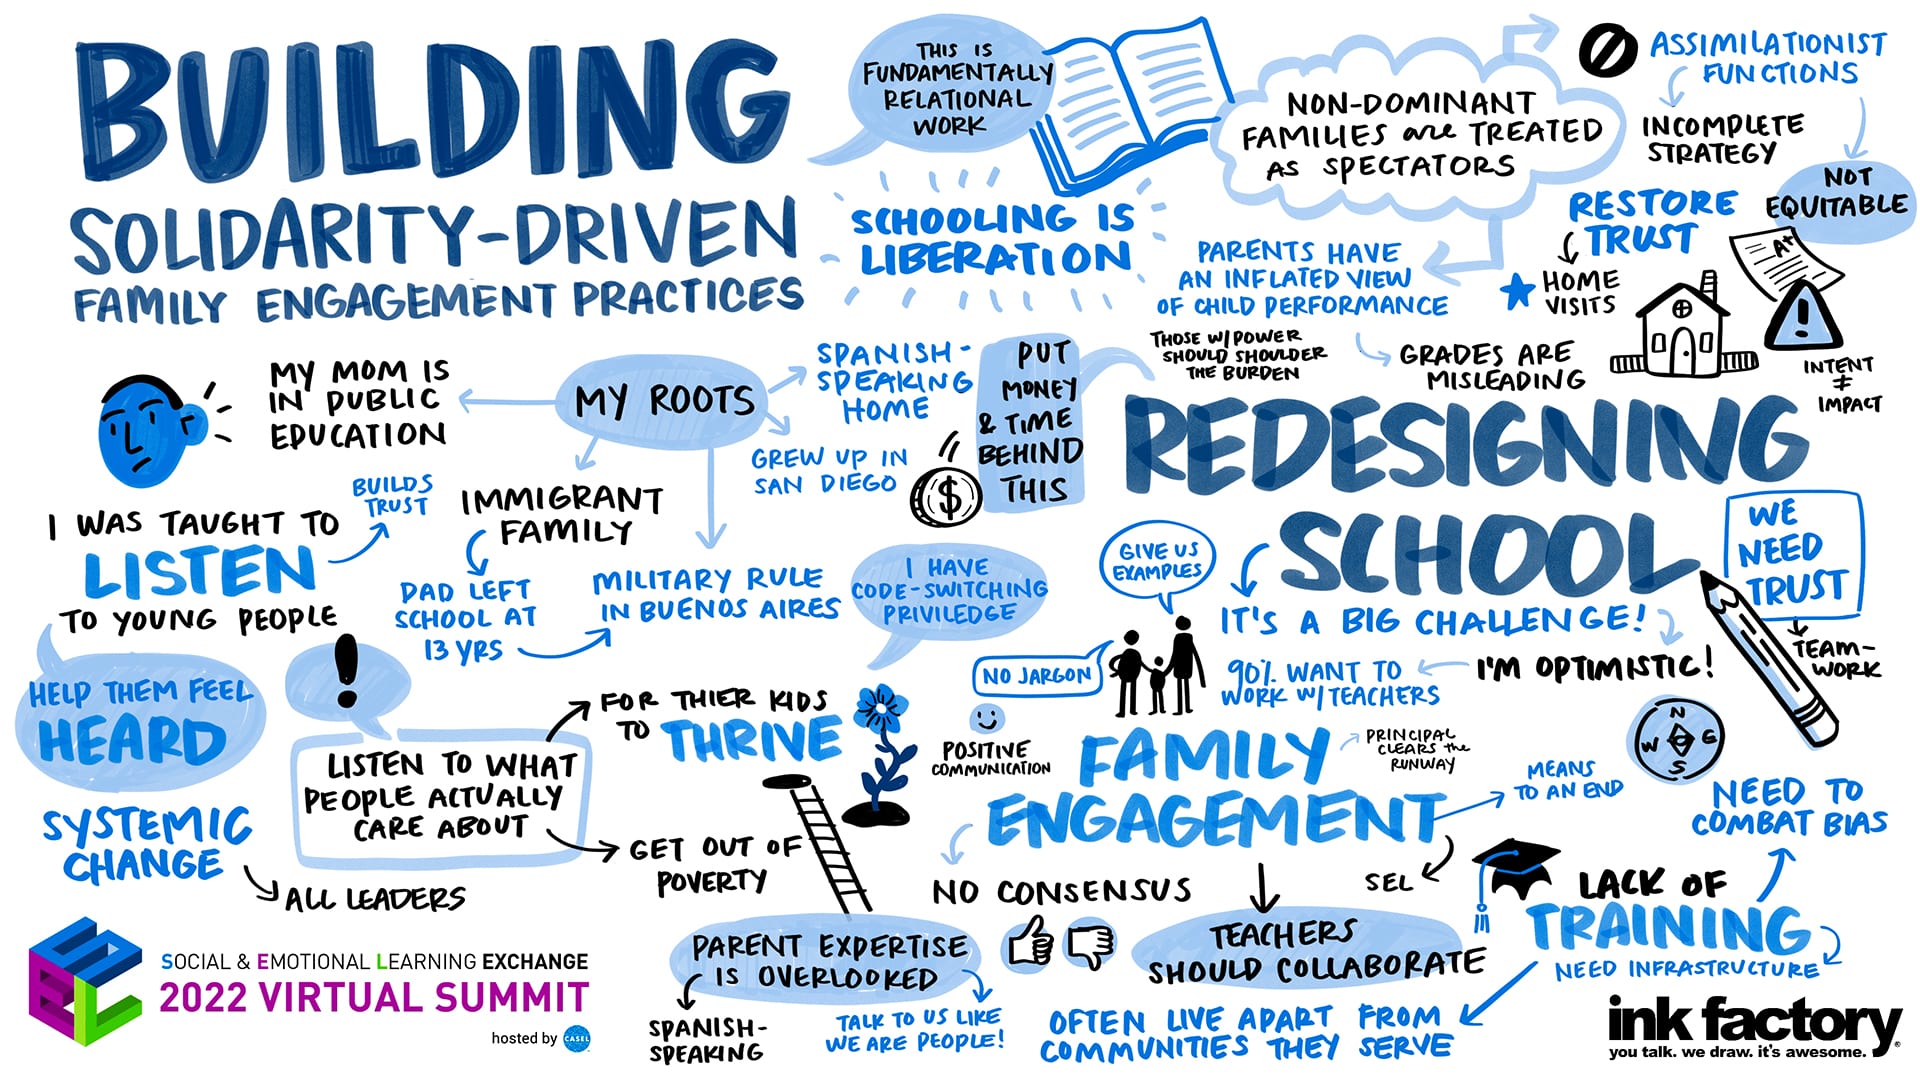 Hand-drawn visual representation of Dr. Eyal Bergman's main points in his keynote address, "Building Solidarity-Driven Family Engagement Practices."